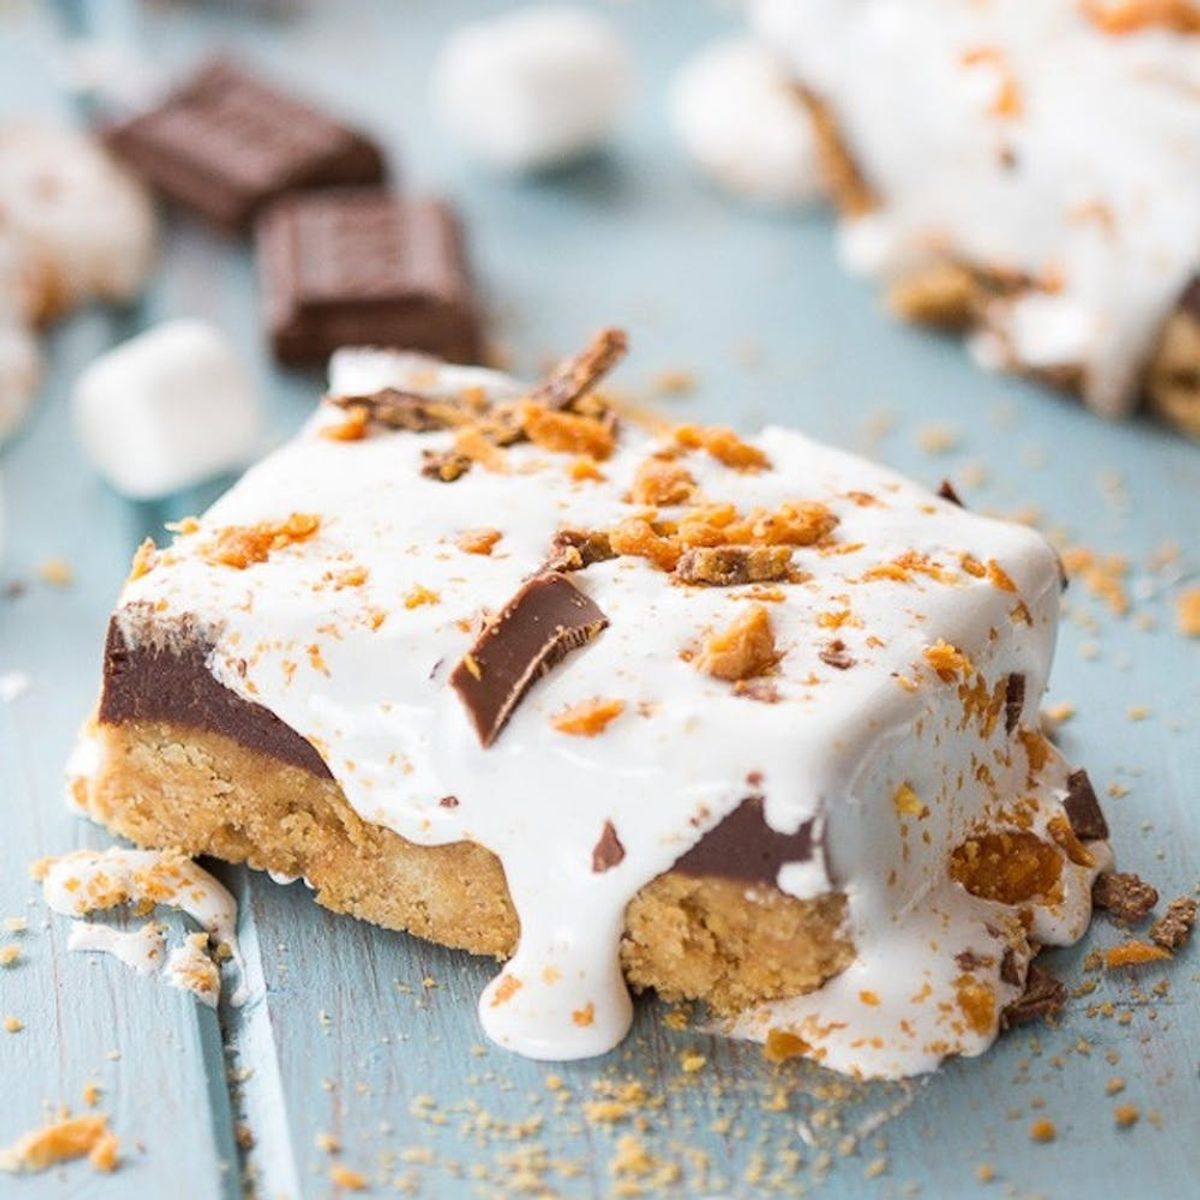 20 S’mores Recipes for Your Next Glamping Trip